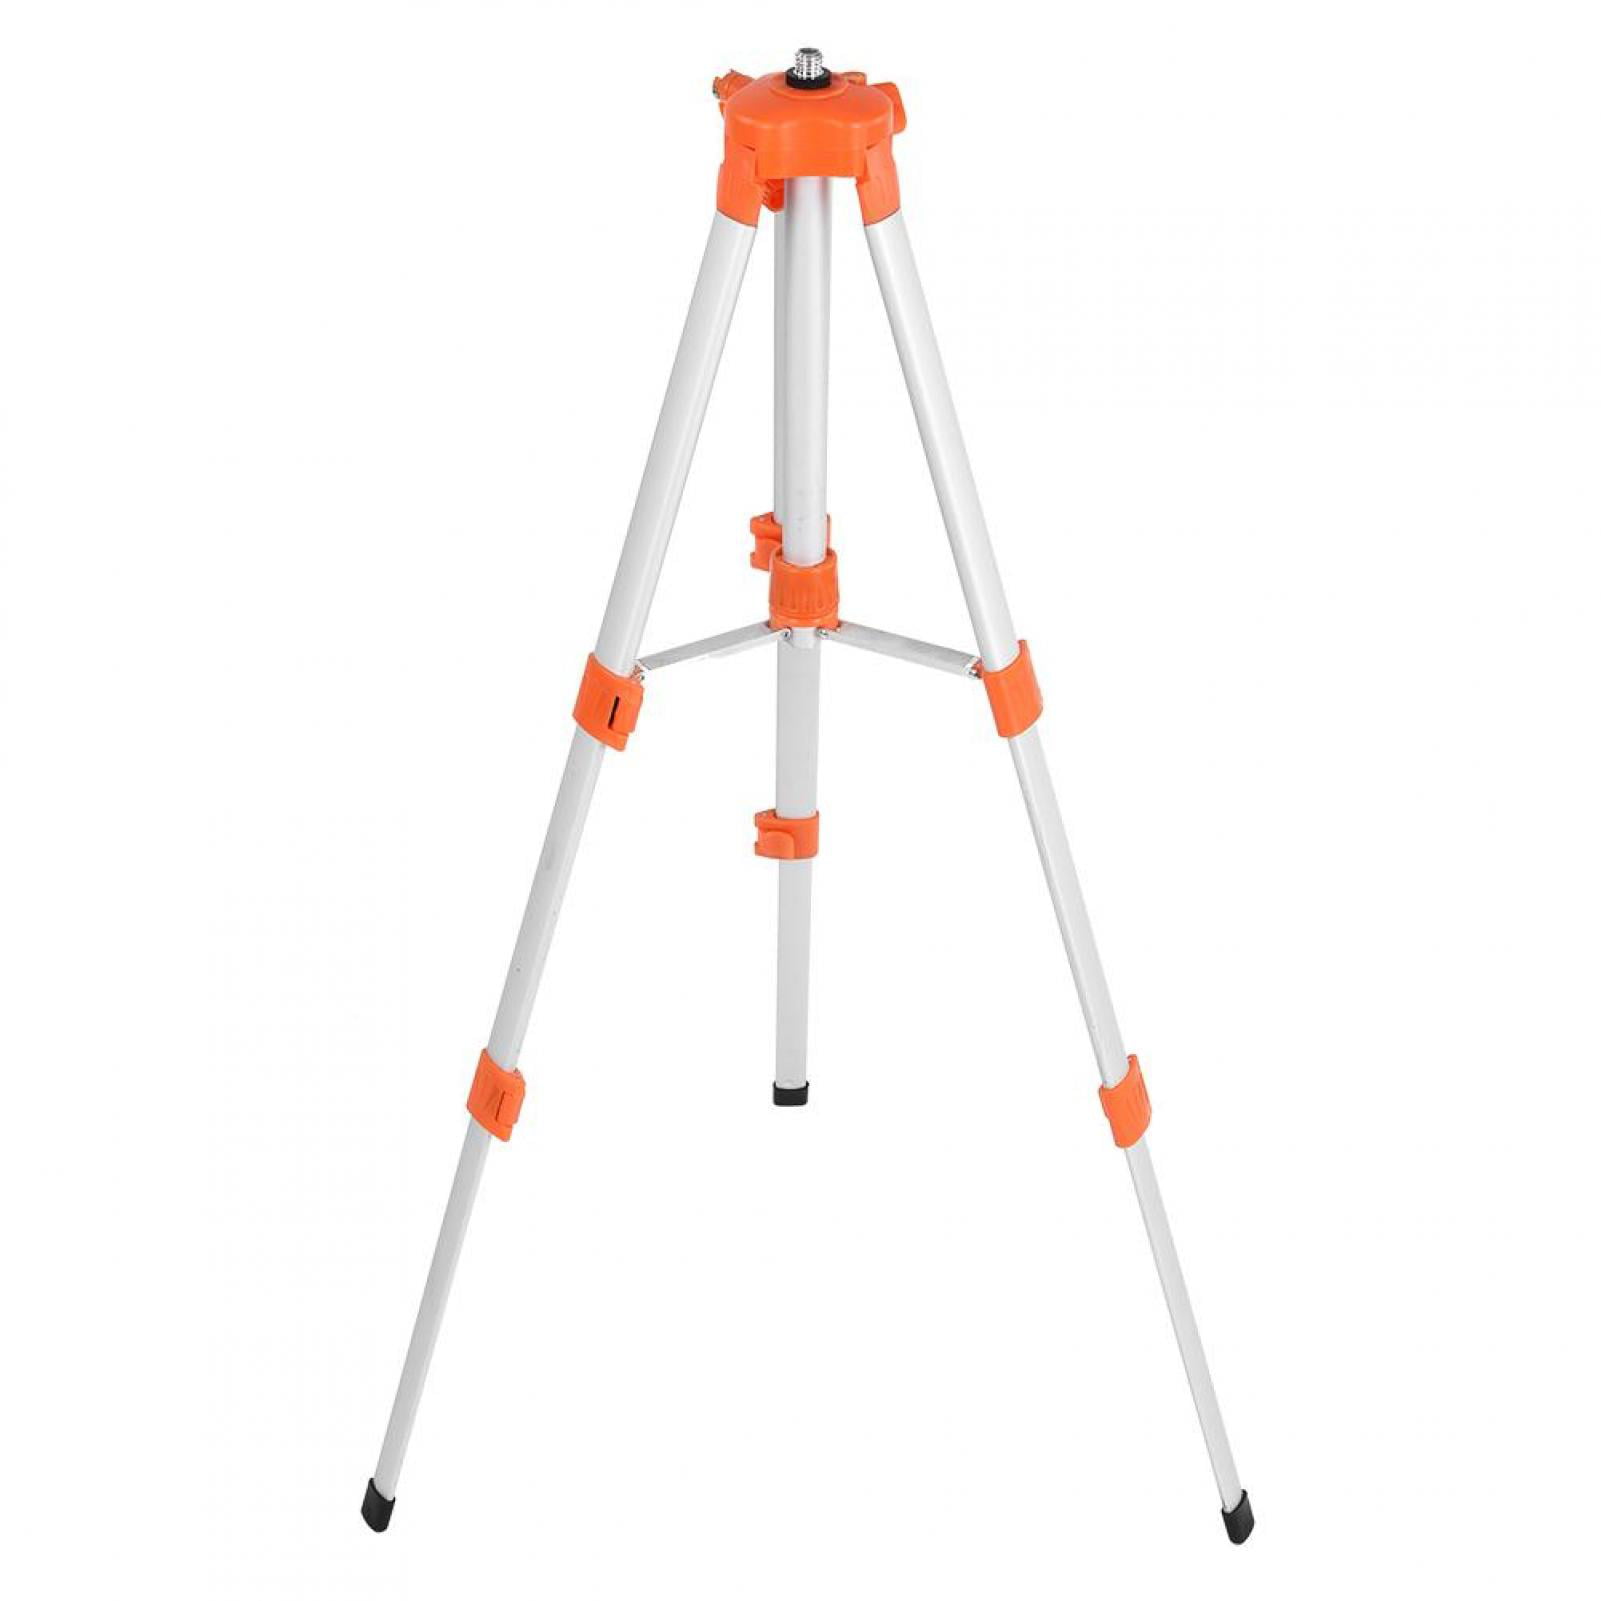 1.2m Adjustable Tripod Level Stand 3-Way Joint with Removable Quick Release Plate Tripod Level Stand for Self-Leveling Laser Level Measurement Tool 1.2/1.5M